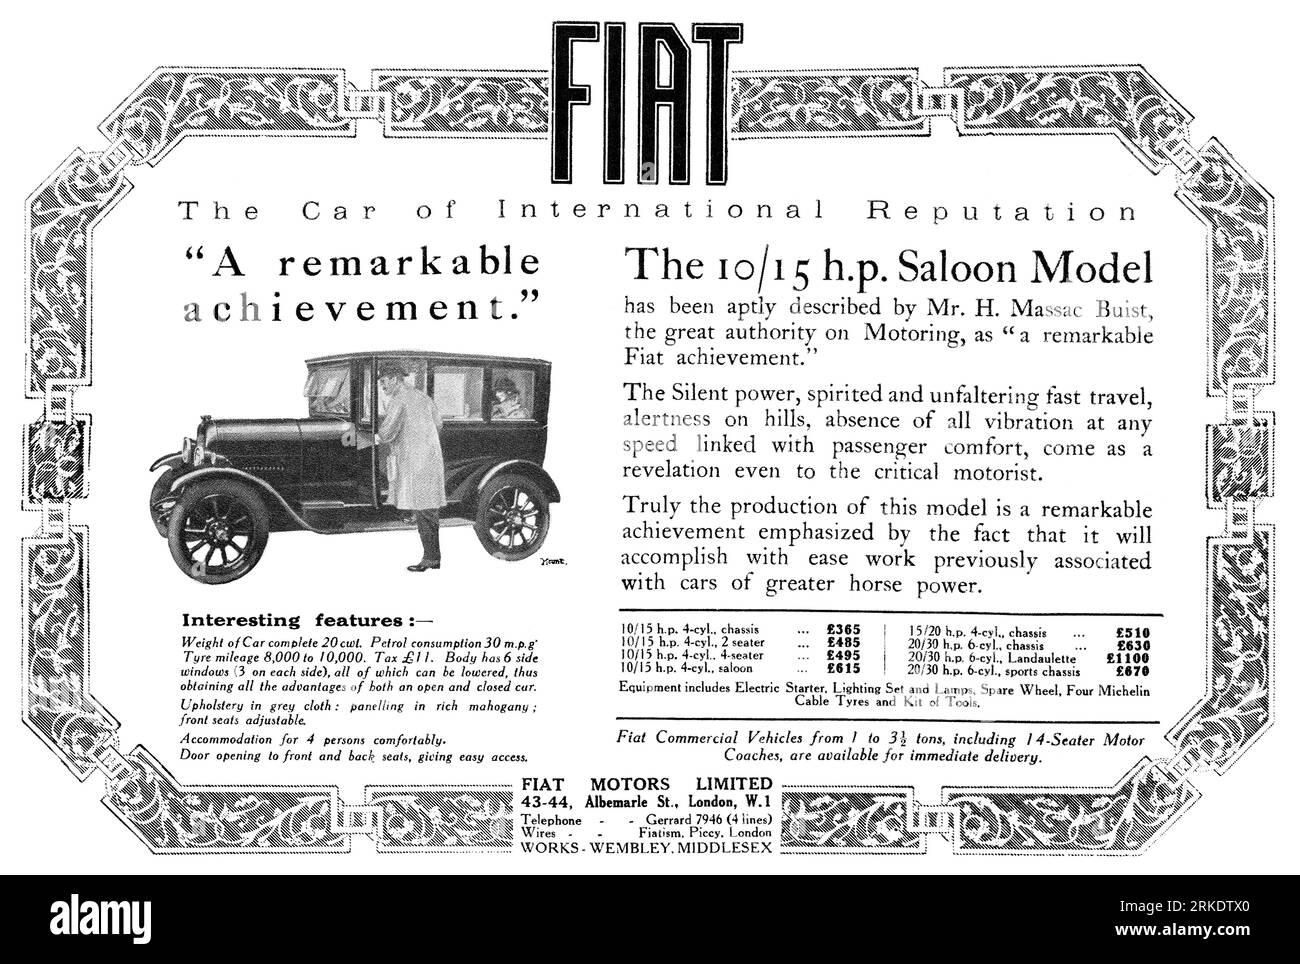 1923 British advertisement for the Fiat 10/15 h.p. saloon model motor car. Stock Photo